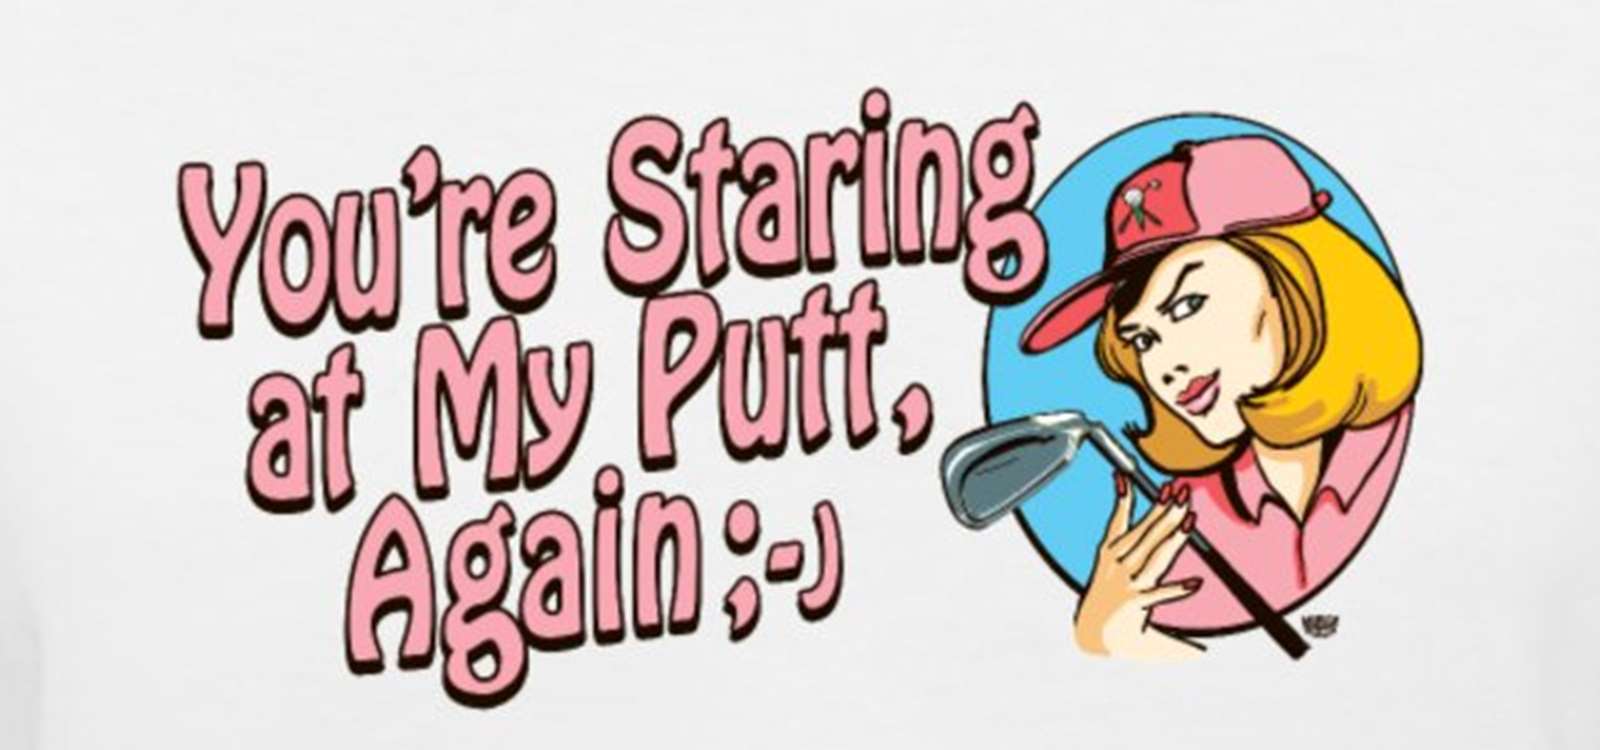 Youre Staring At My Putt Again Says This Sexy Lady Golfer Womens Golf Humor Tees By Mudge Studios